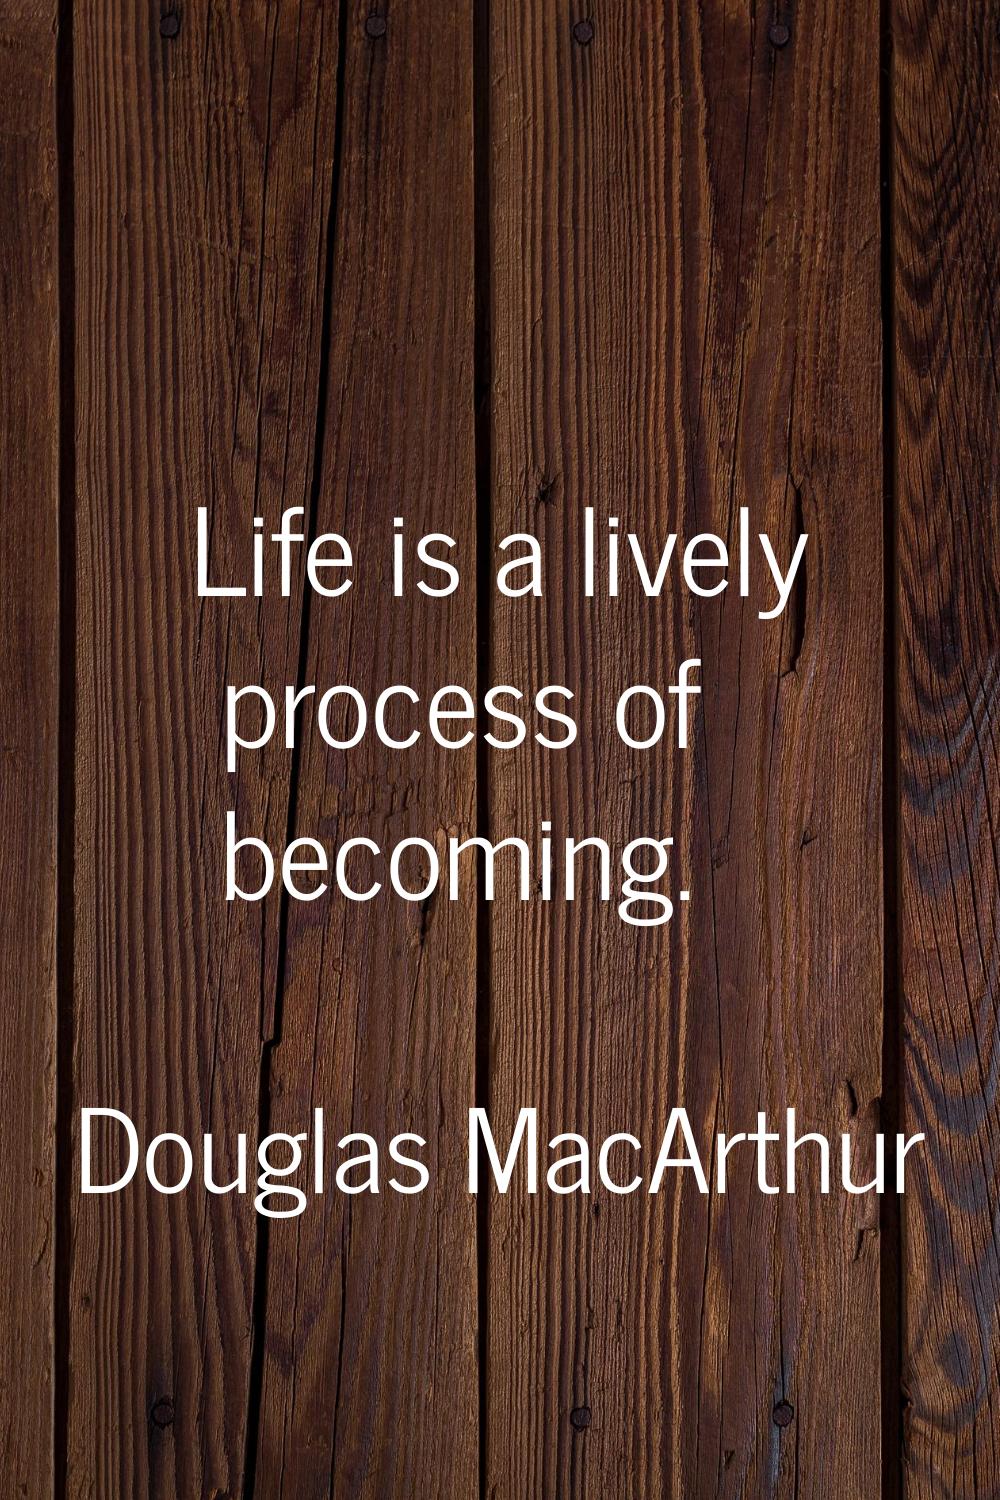 Life is a lively process of becoming.